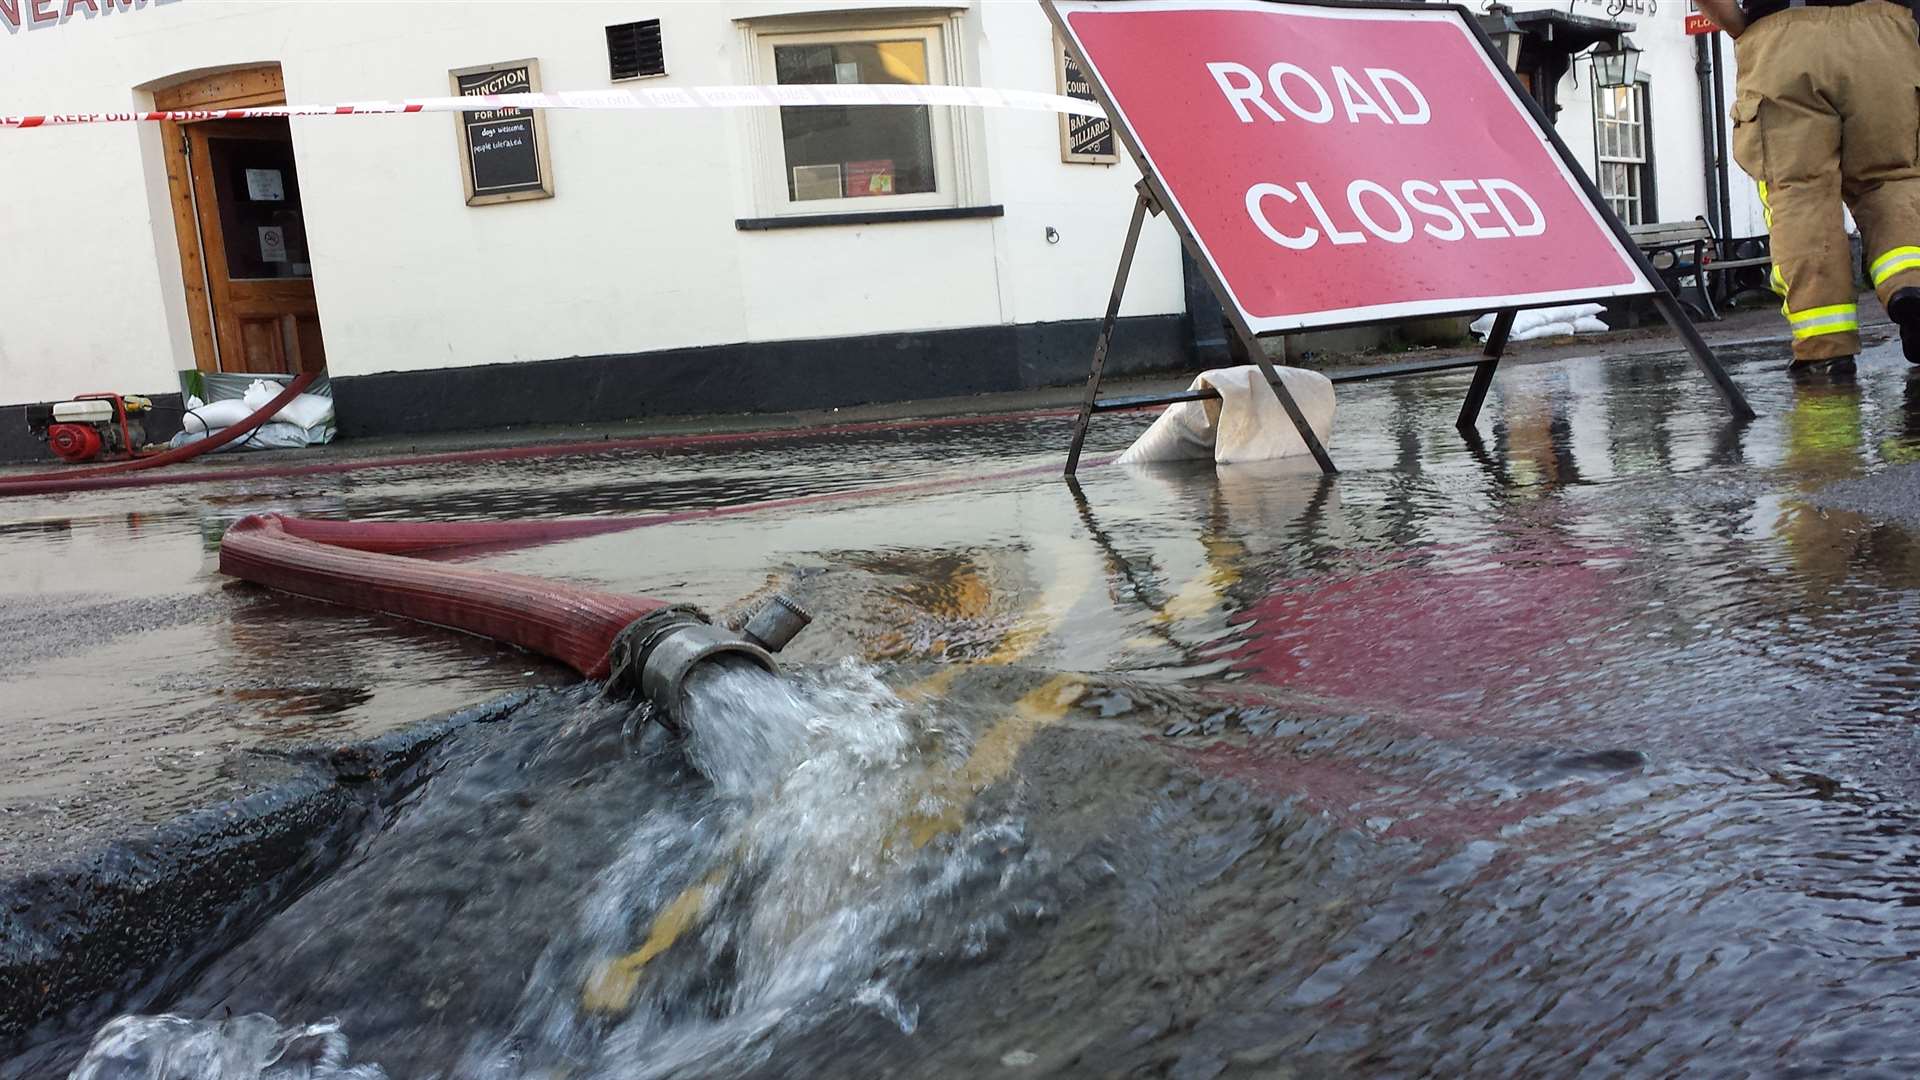 Roads are closed due to flooding. Library image.